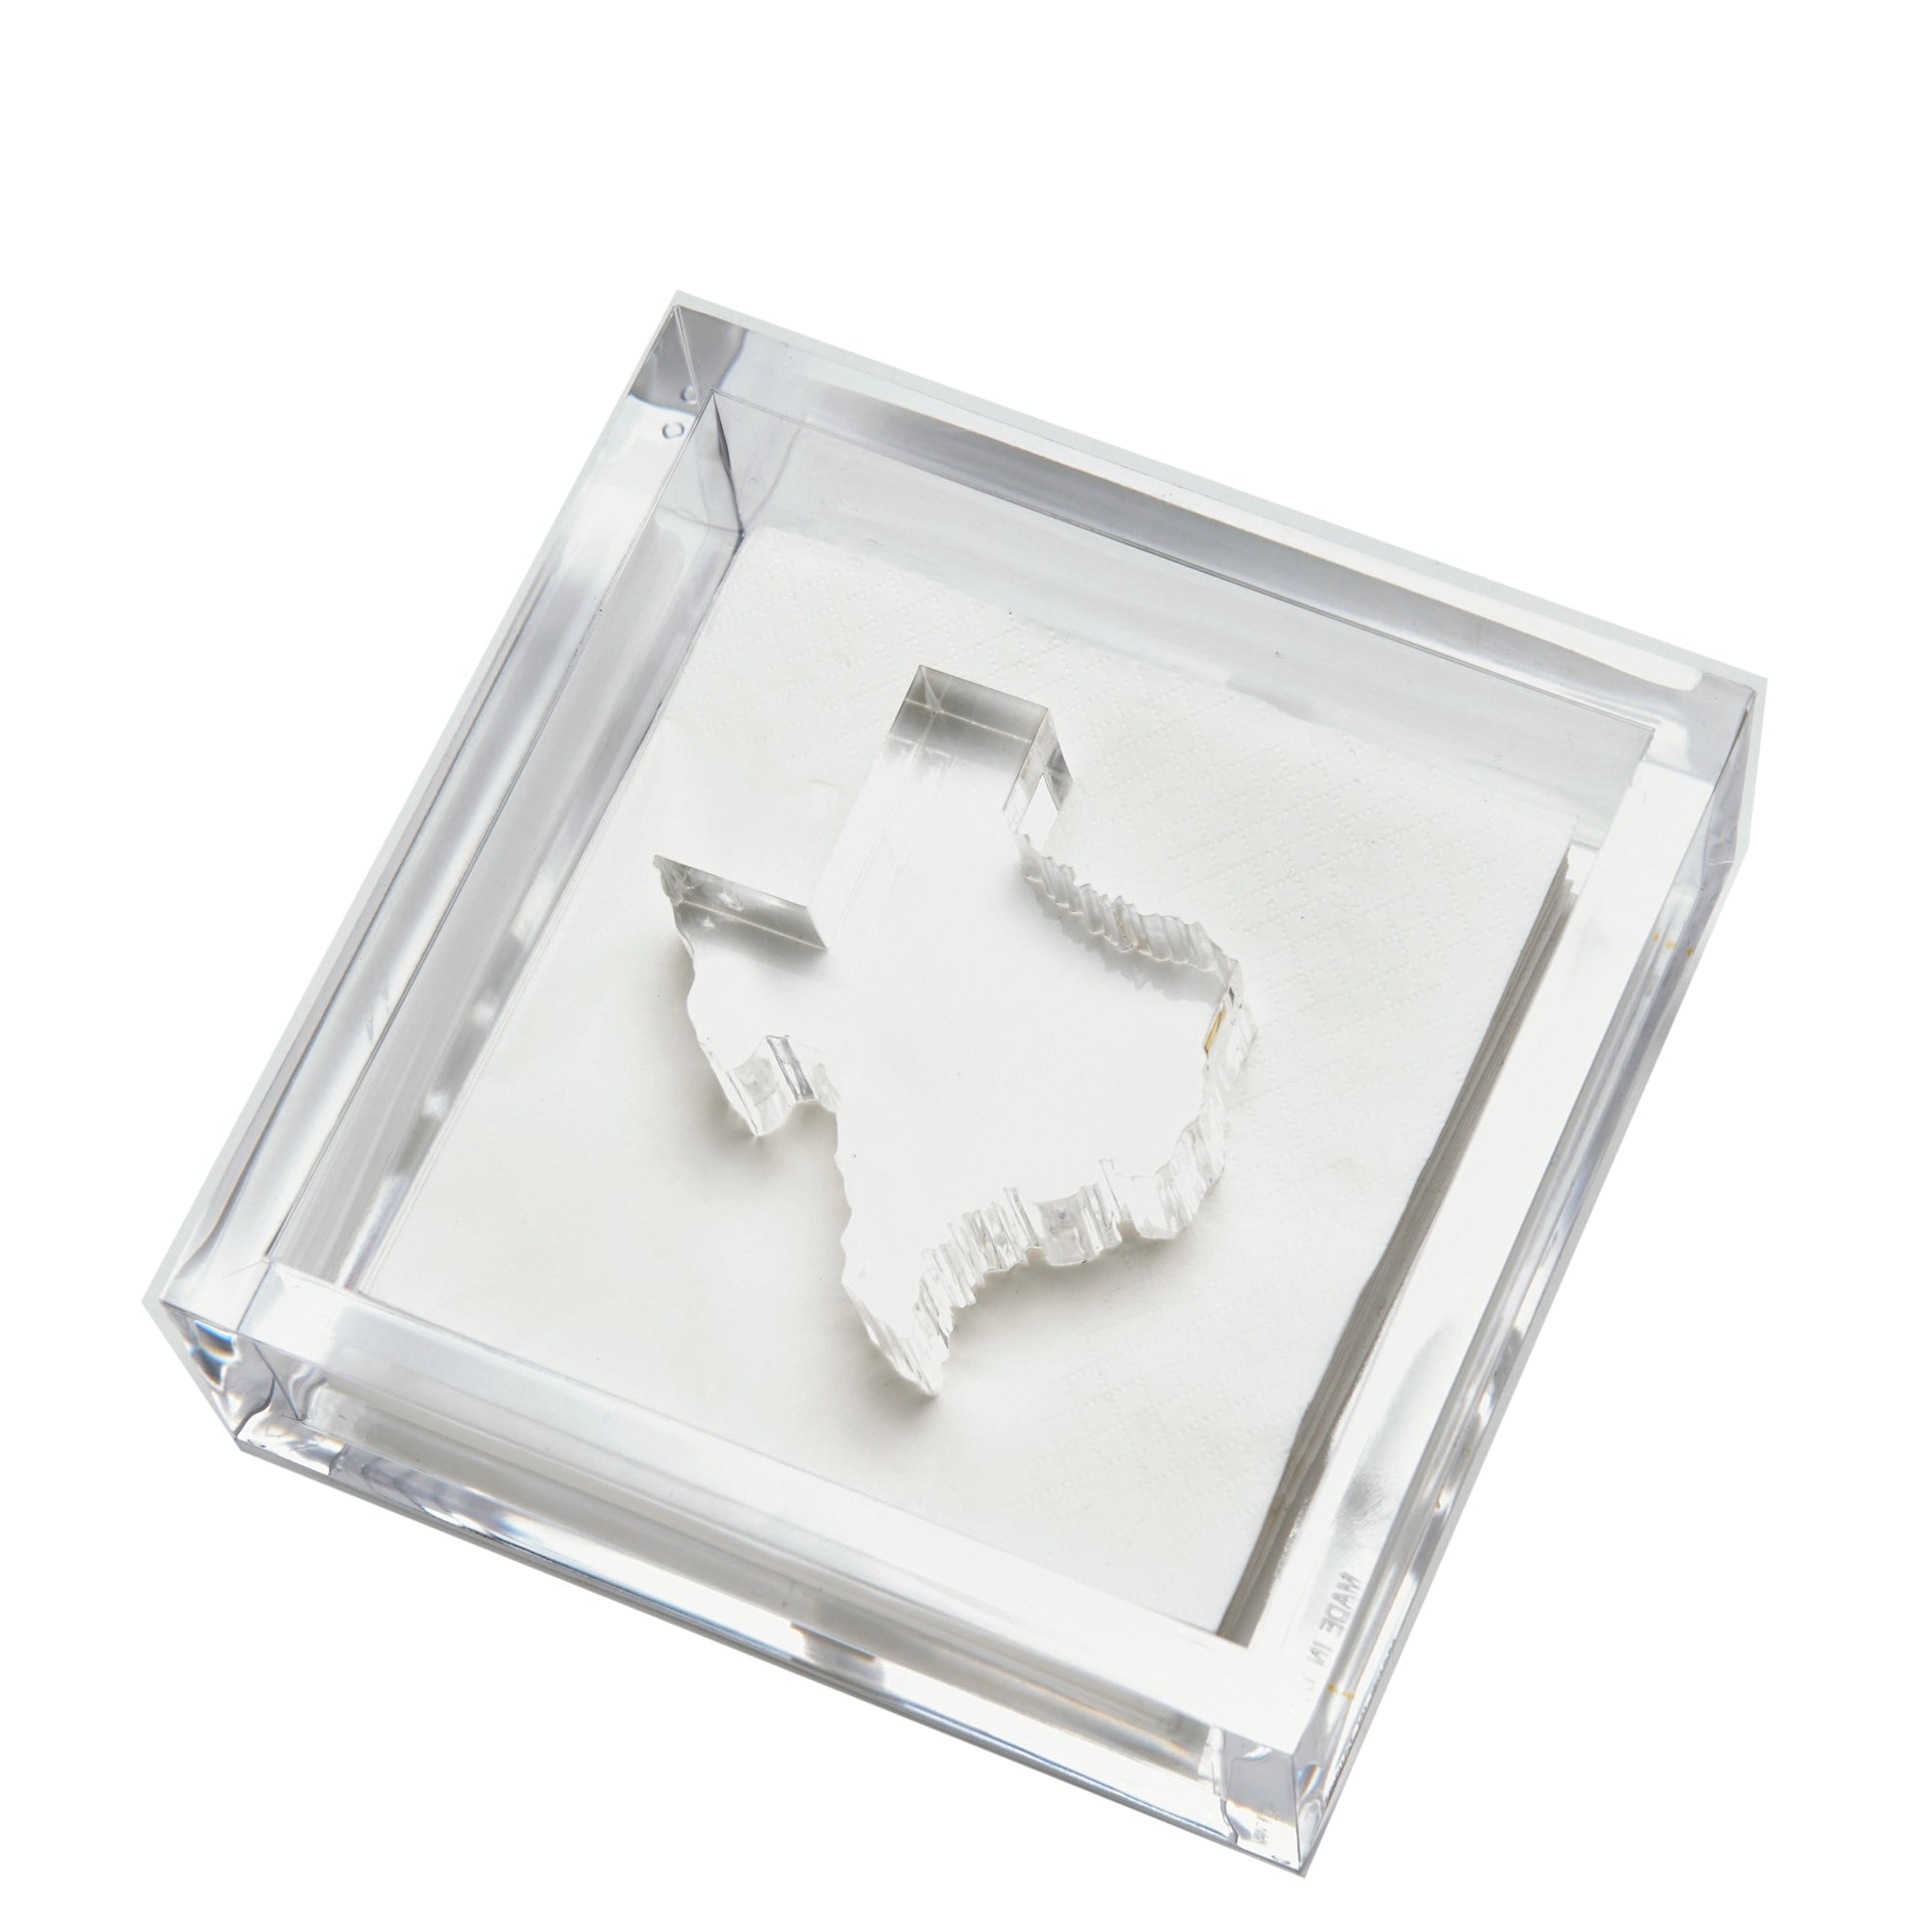 Cocktail Napkin Holder TEXAS 4 inches by 4 inches 